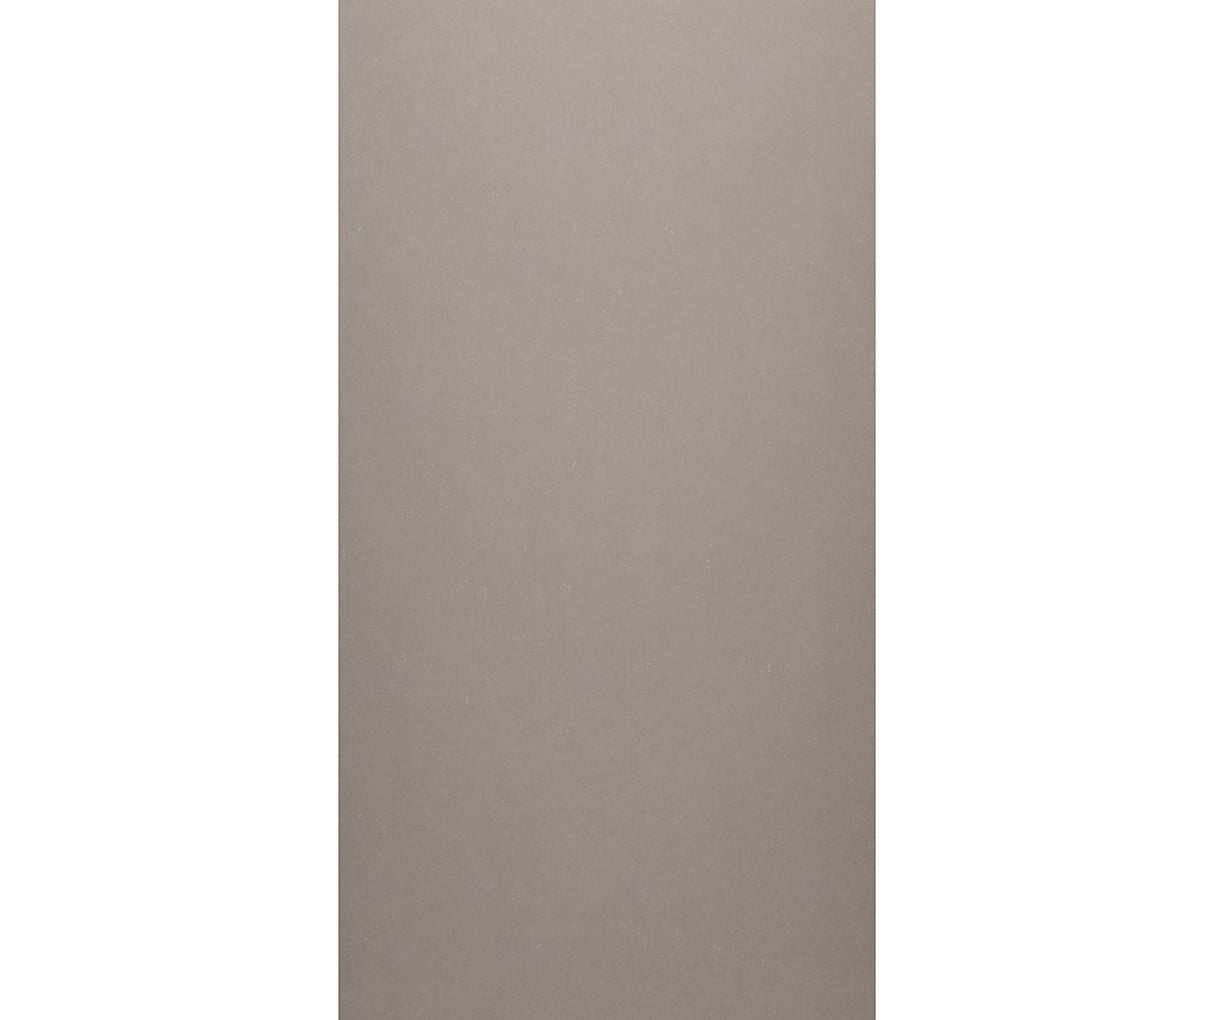 Swanstone SMMK-9642-1 42 x 96 Swanstone Smooth Tile Glue up Bathtub and Shower Single Wall Panel in Clay SMMK9642.212